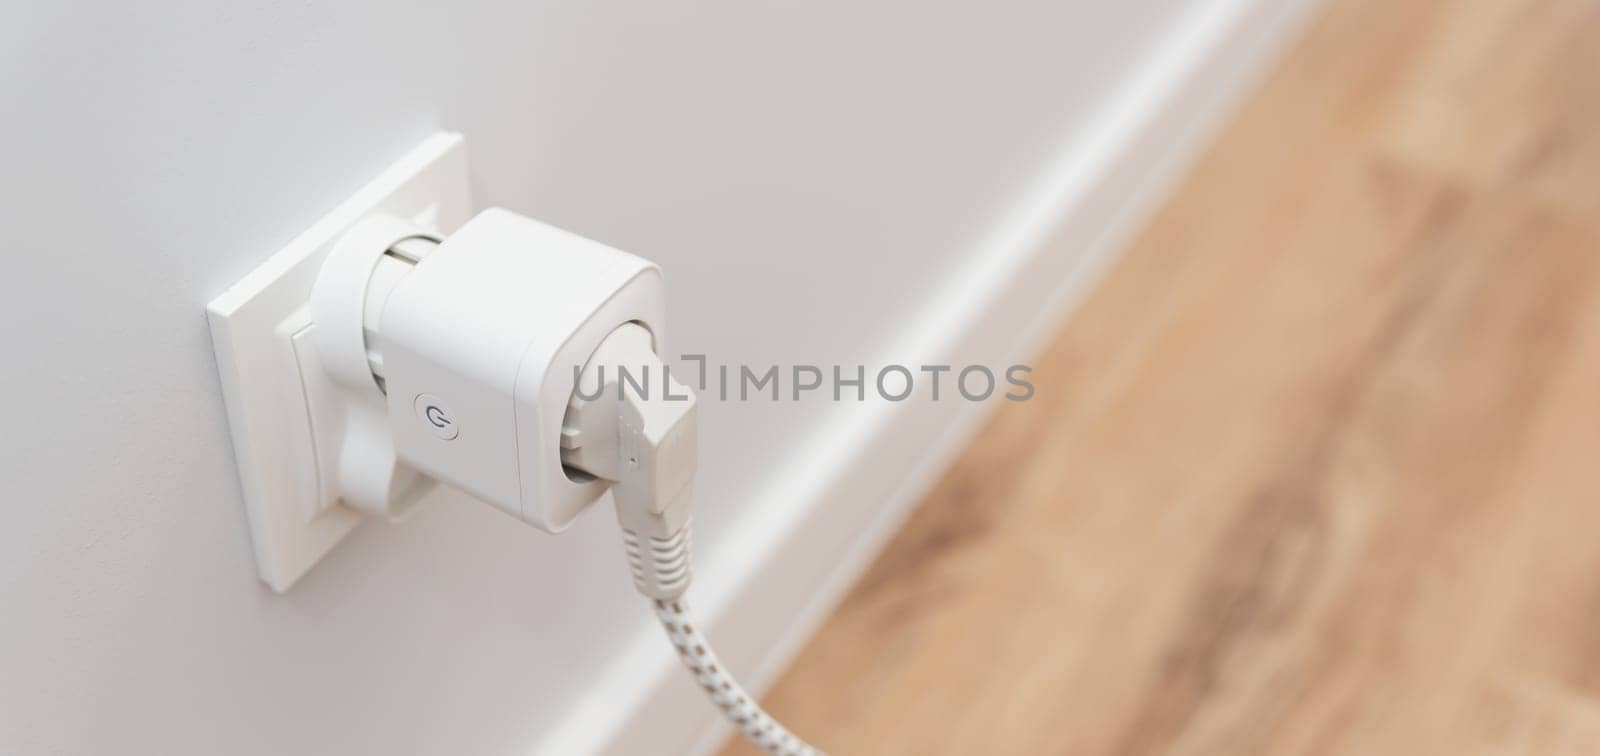 Using smart socket on the wall in a smart home by simpson33